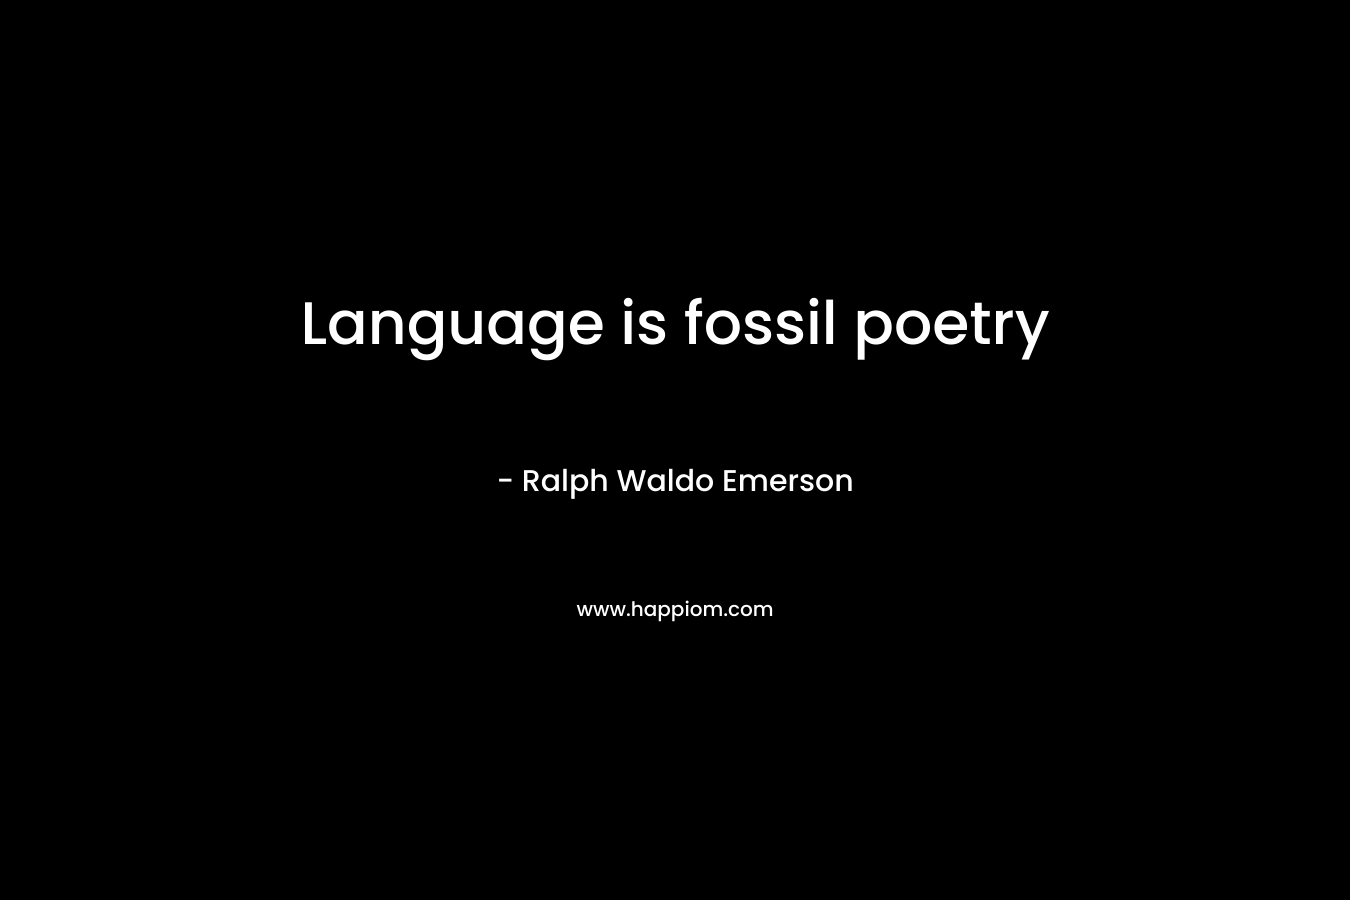 Language is fossil poetry